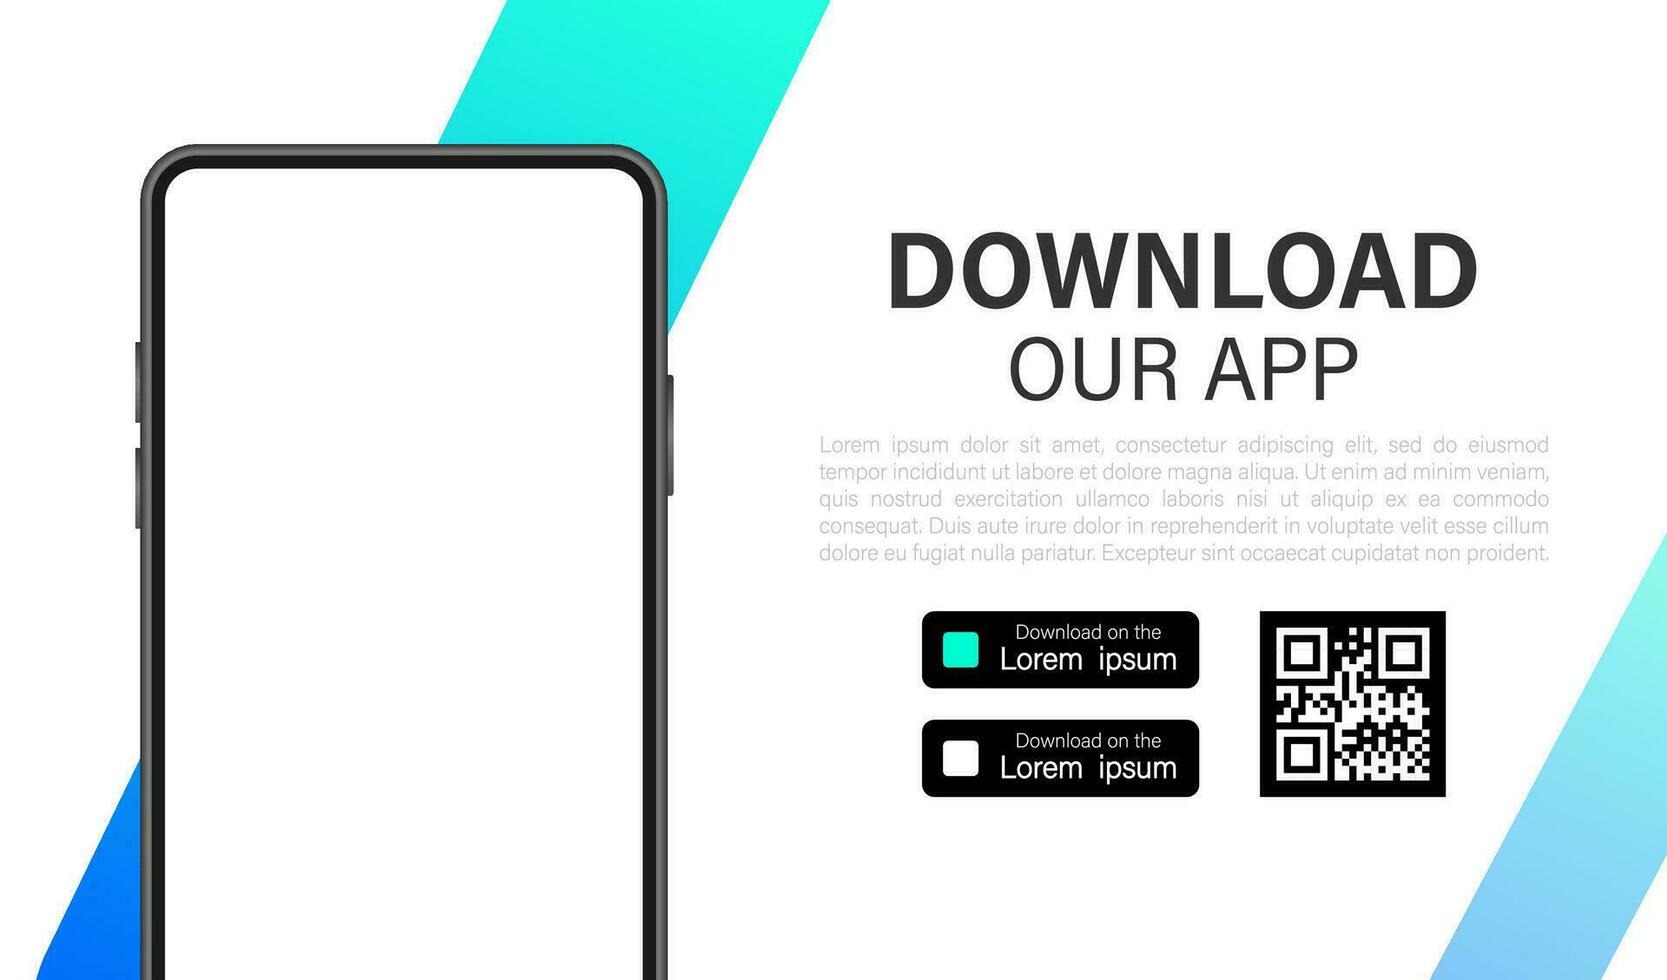 Download pages. Mobile app application. Business concept. Hand touch screen smartphone icon. vector